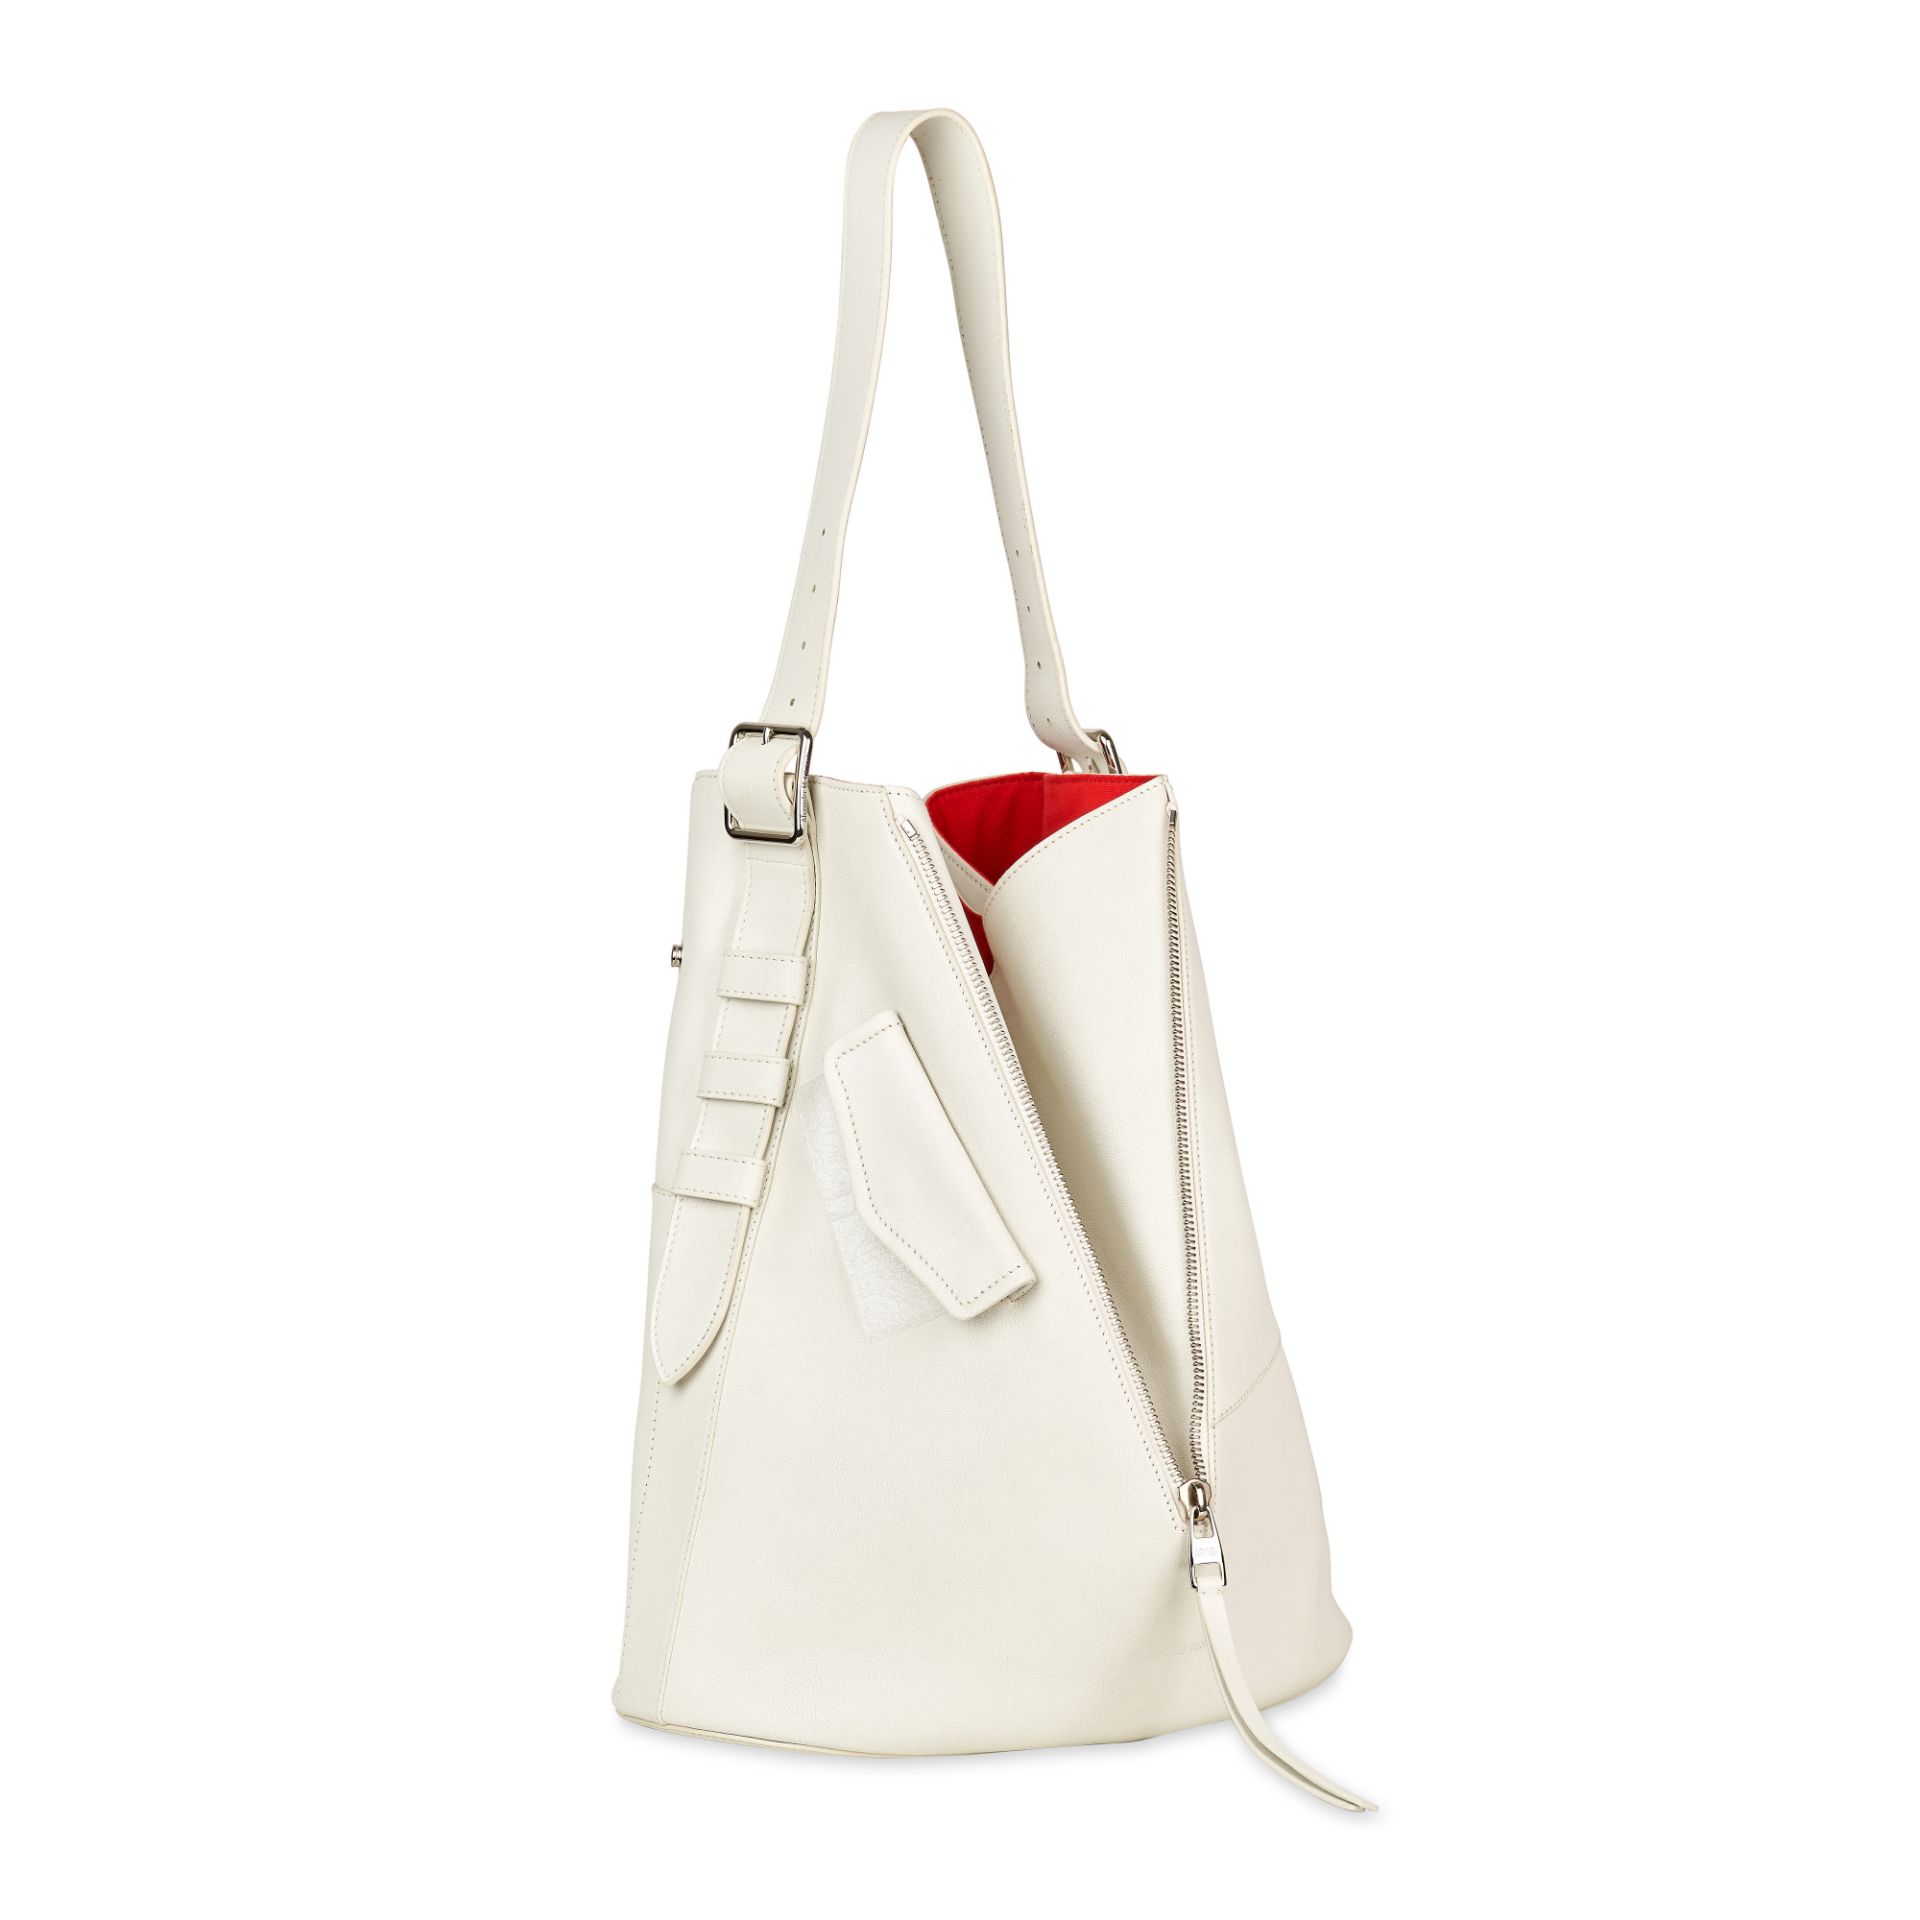 ALEXANDER MCQUEEN WHITE LEATHER BUCKET BAG - Image 2 of 4